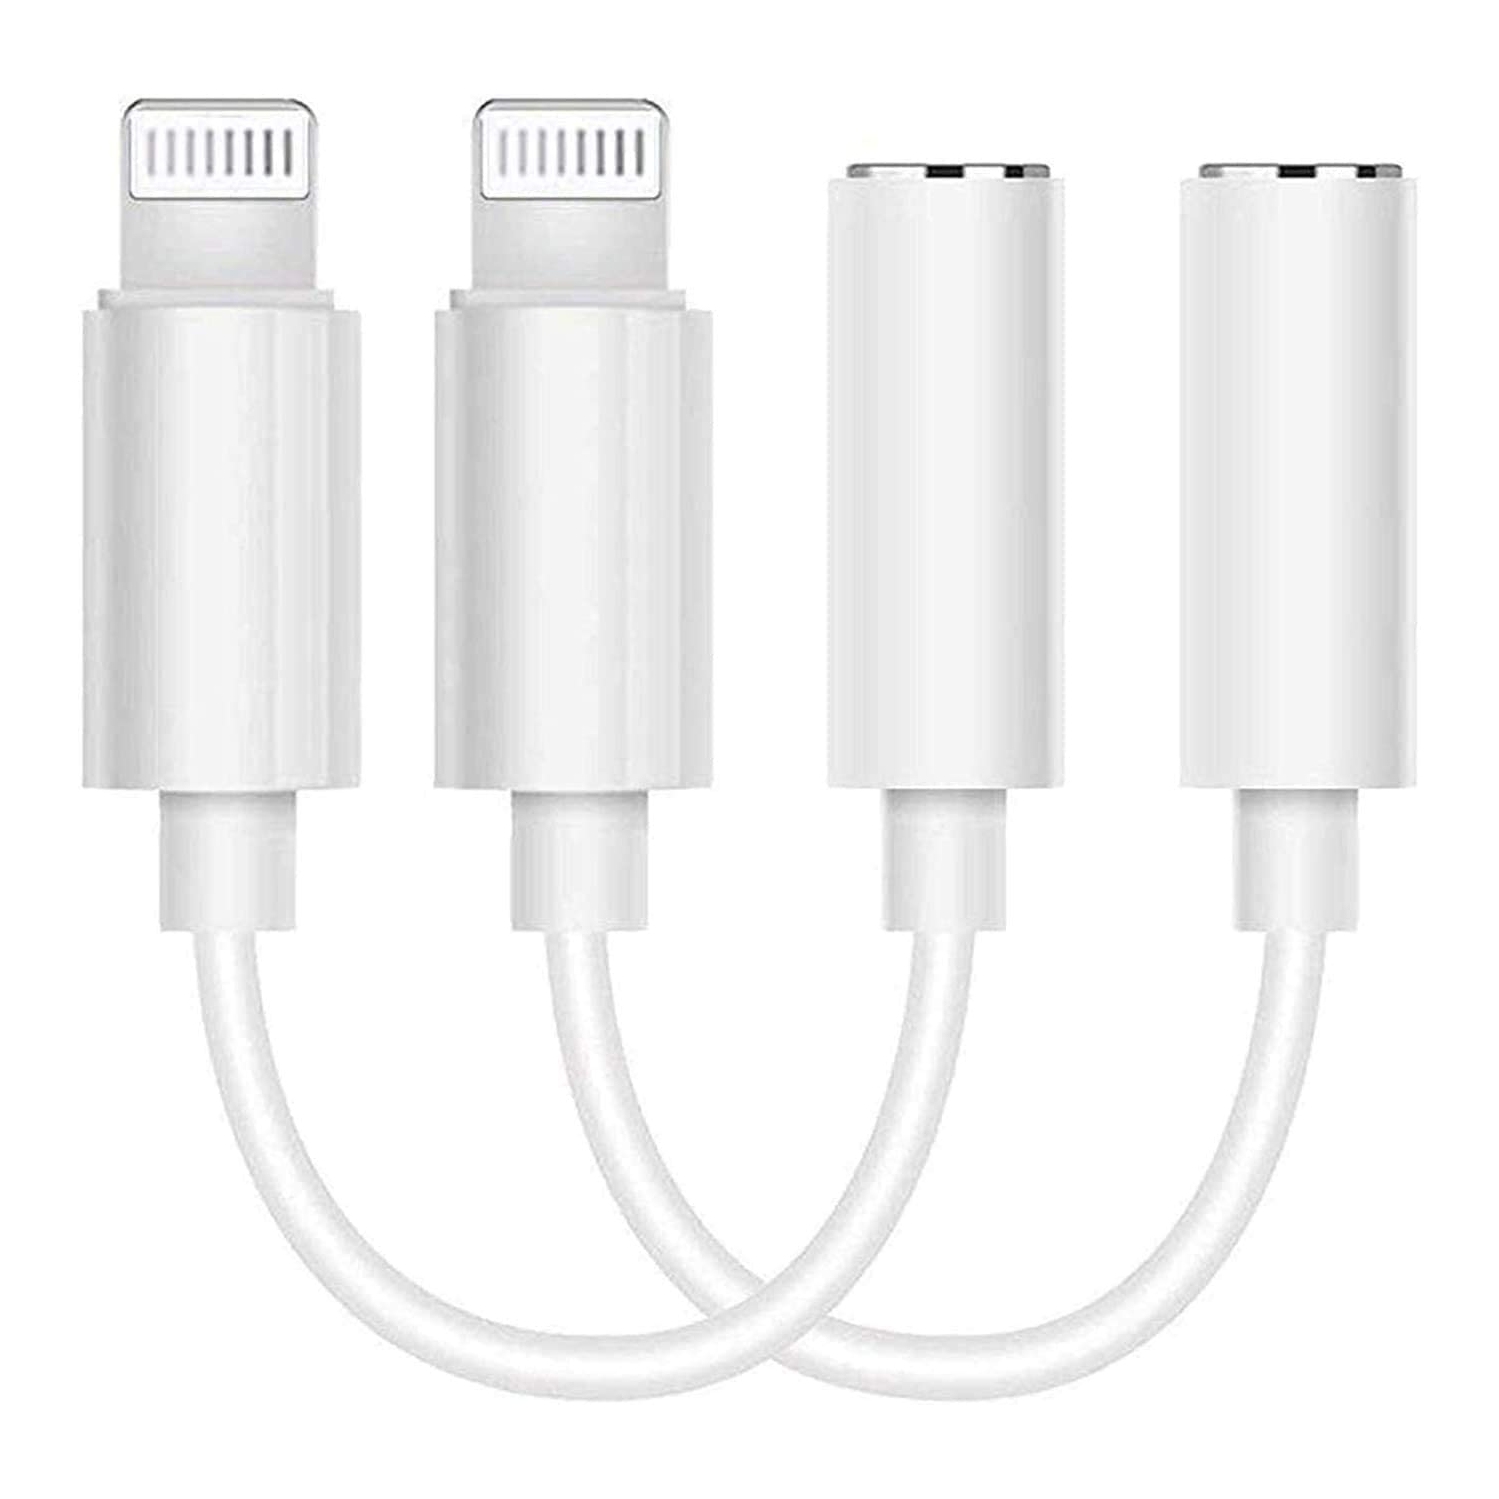 [Apple MFi Certified] iPhone Dongle Headphone Adapter, Lightning to 3.5mm Headphone Jack Adapter Audio AUX Connector Earphone Splitter for iPhone 7/7Plus/8/8Plus/X/XR/XS/XS MAX/11/11 Pro[2 Pack]